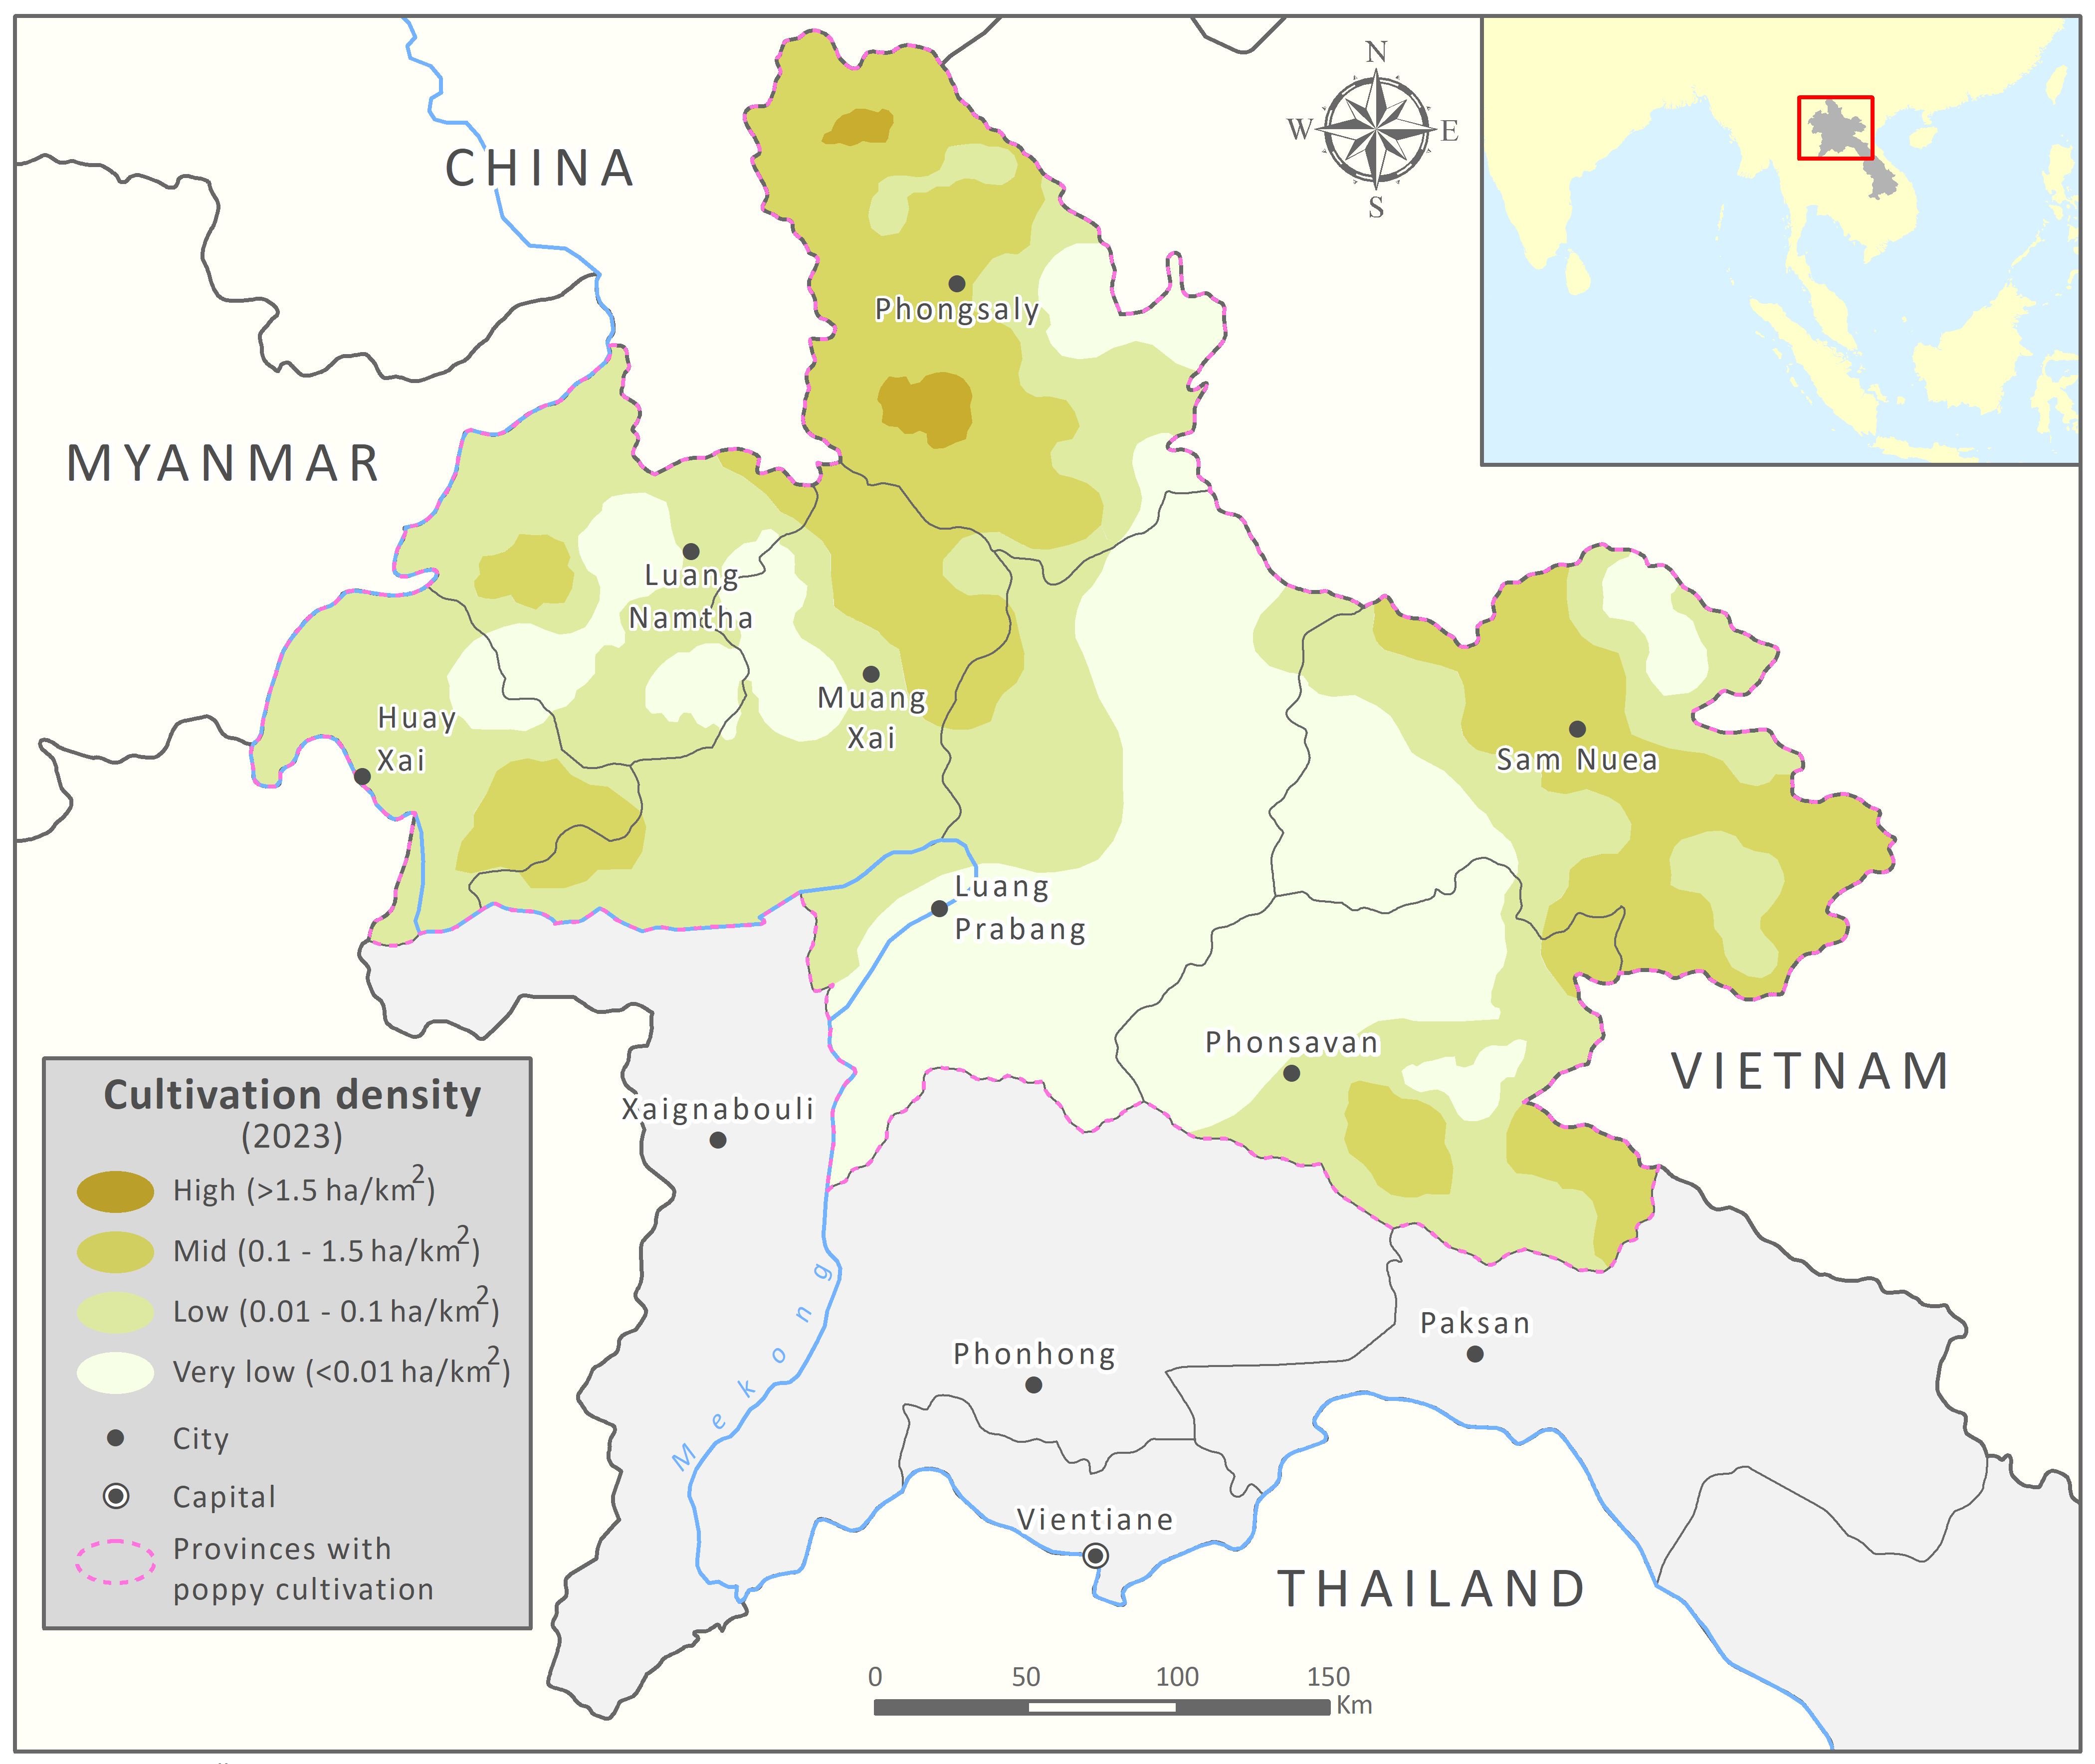 Opium cultivation density in Lao PDR in 2023